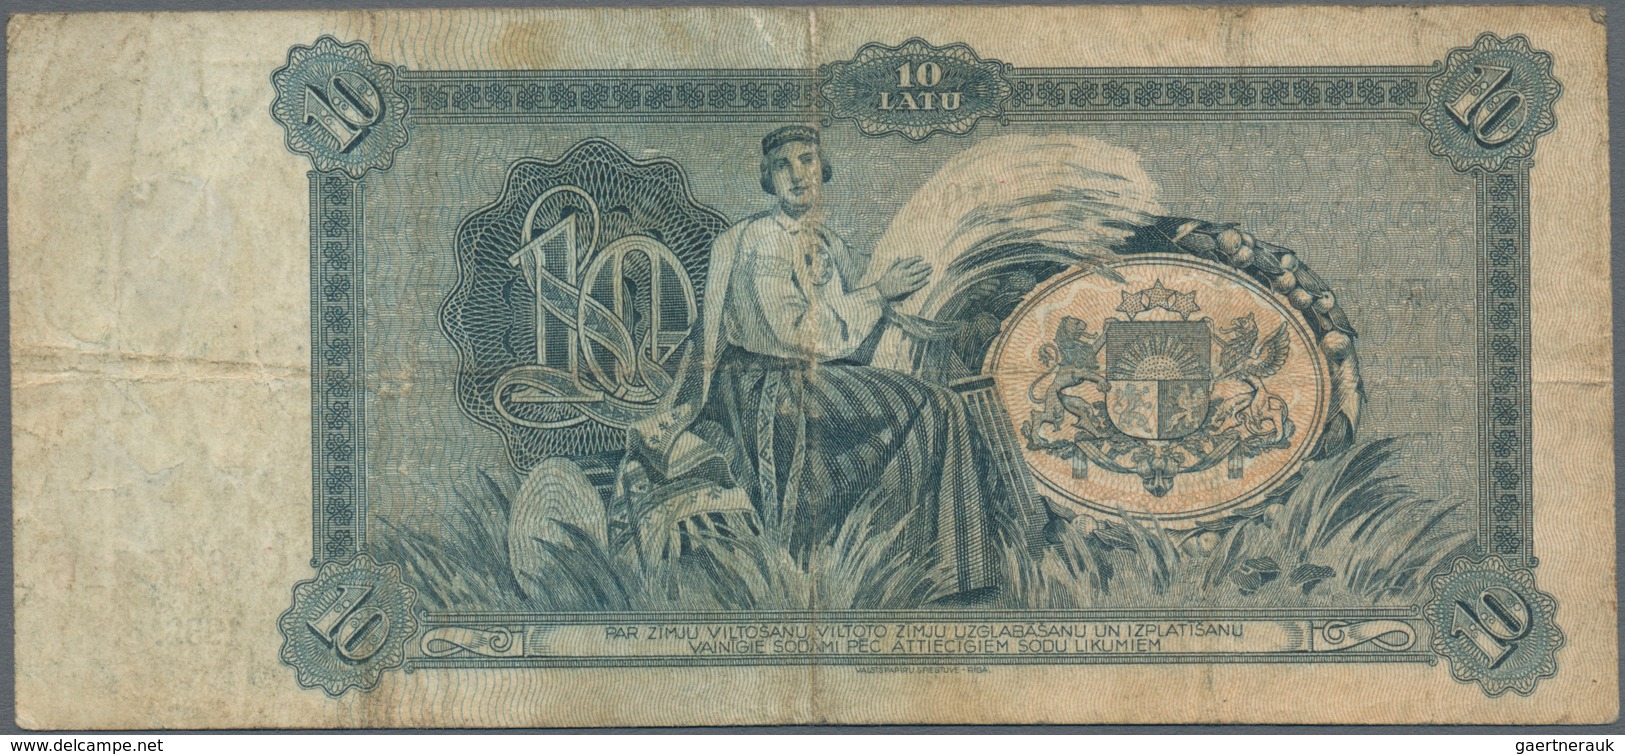 Latvia / Lettland: Set Of 2 Notes Containing 10 Latu 1933 & 1934 P. 24a, 25f, Both Used With Folds A - Letland